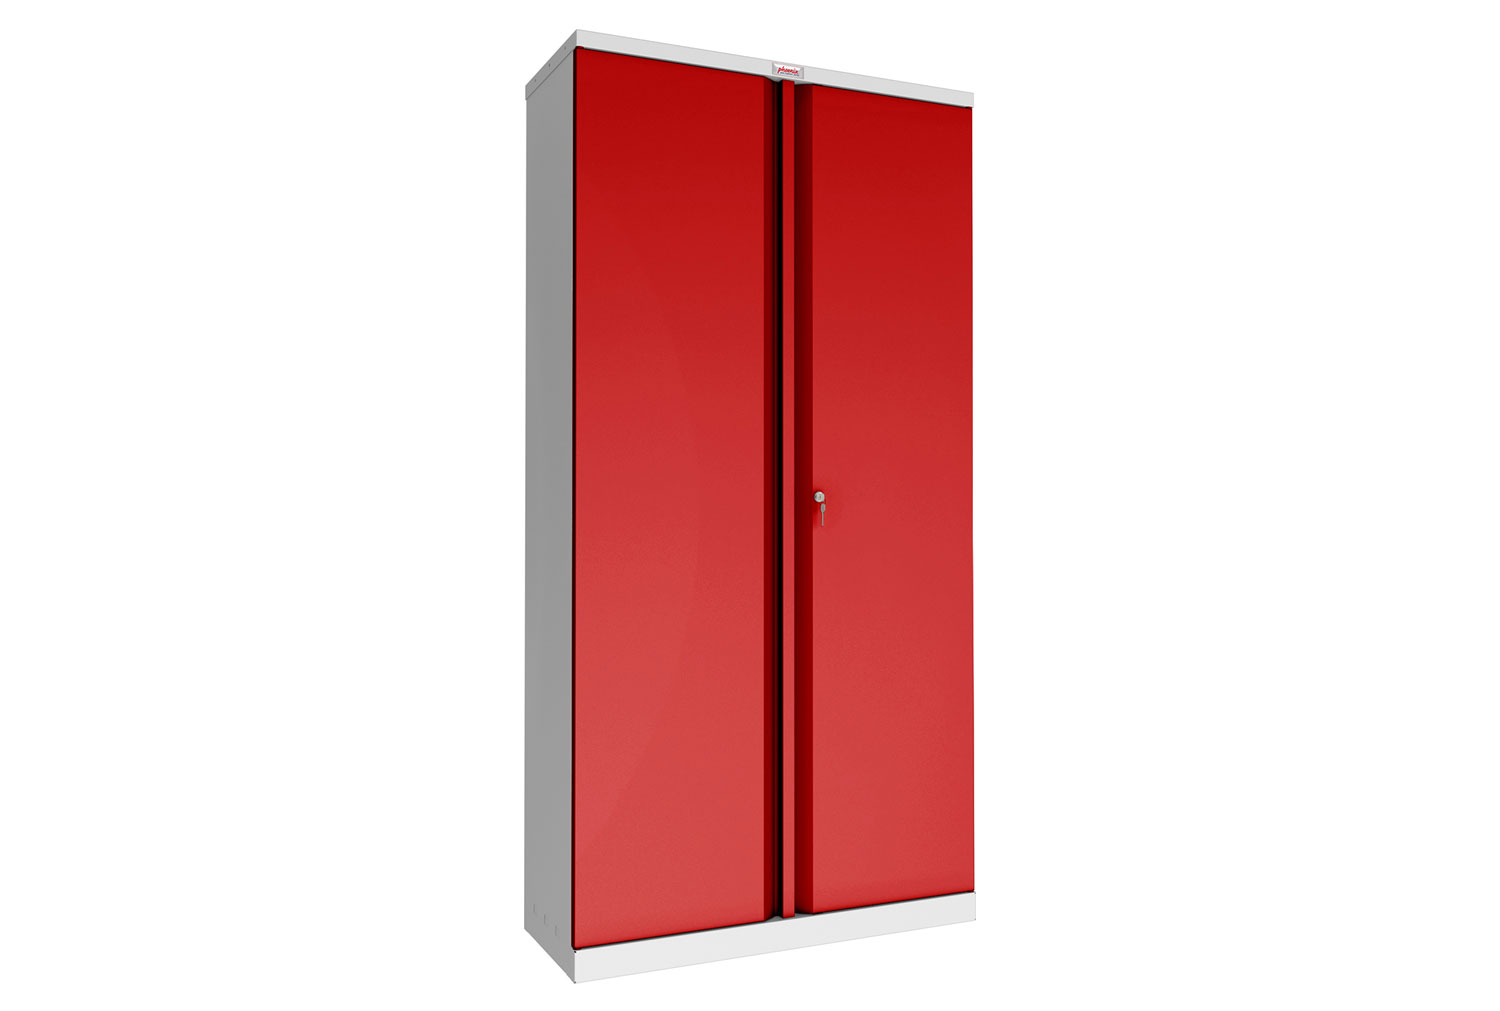 Phoenix SCL Steel Storage Office Cupboards With Key Lock, 4 Shelf - 92wx37dx183h (cm), Red, Fully Installed